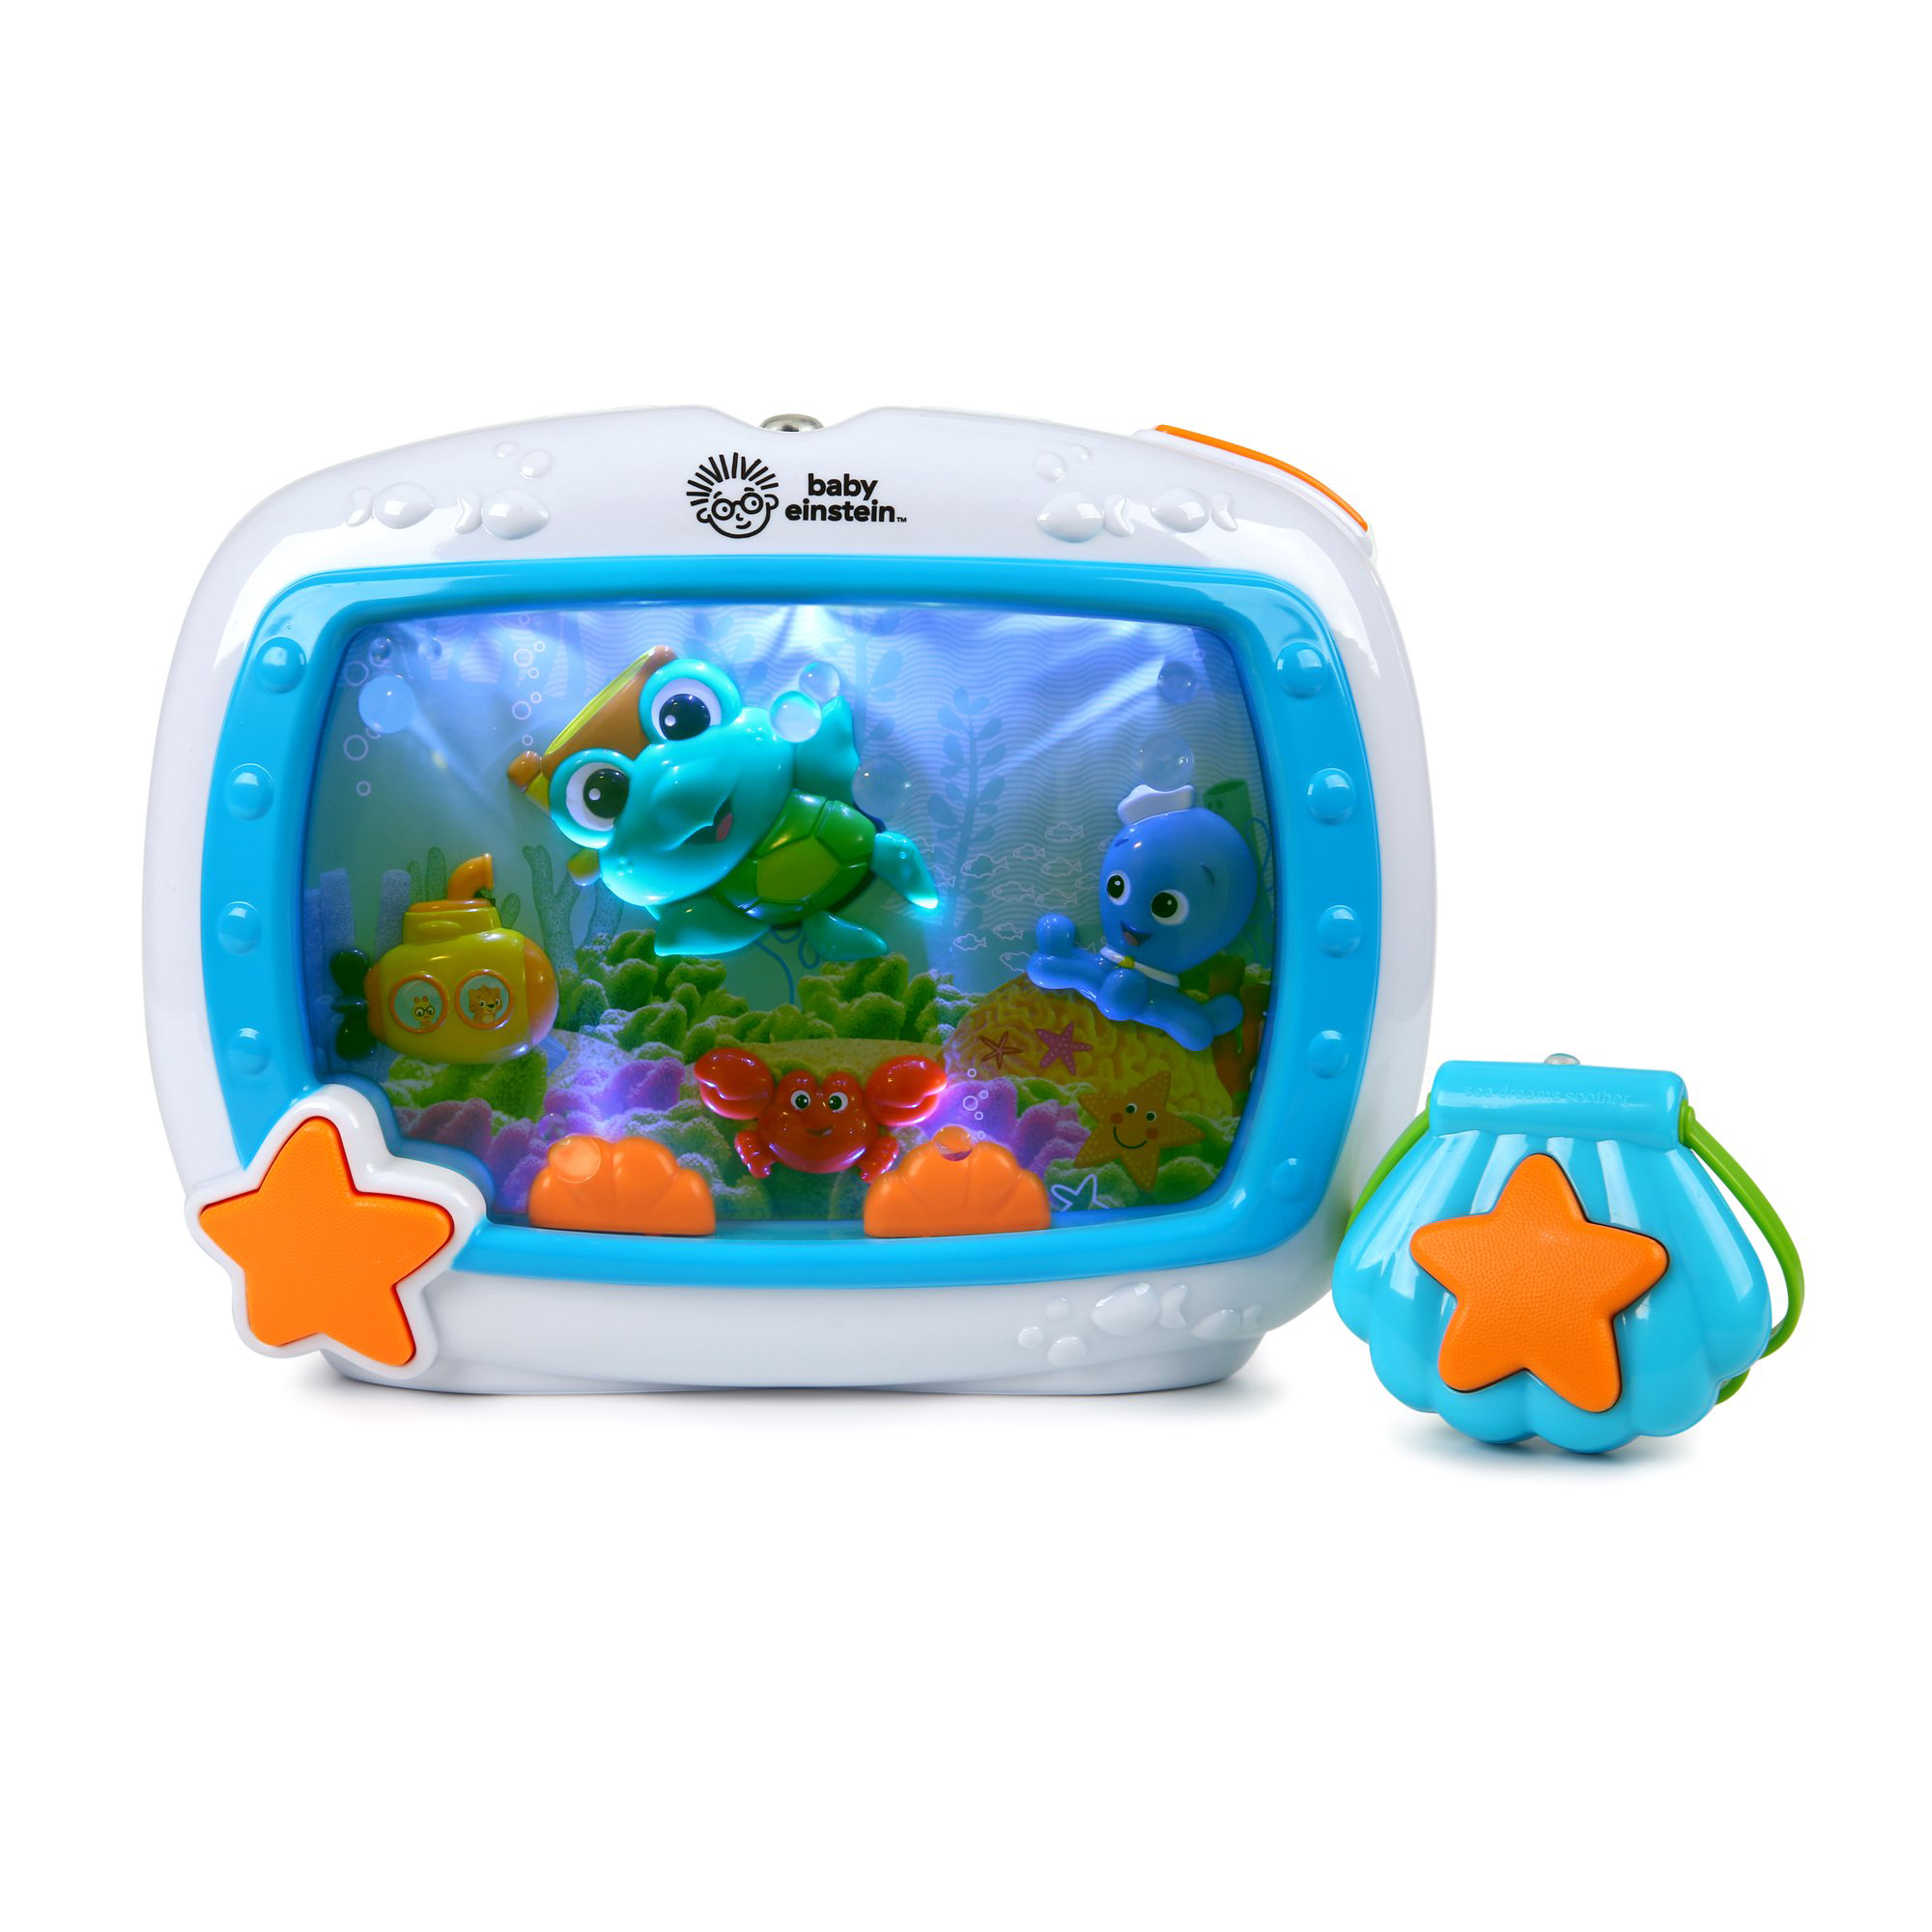 Baby Einstein Sea Dreams Soother Crib Toy with Remote, Lights and Melodies